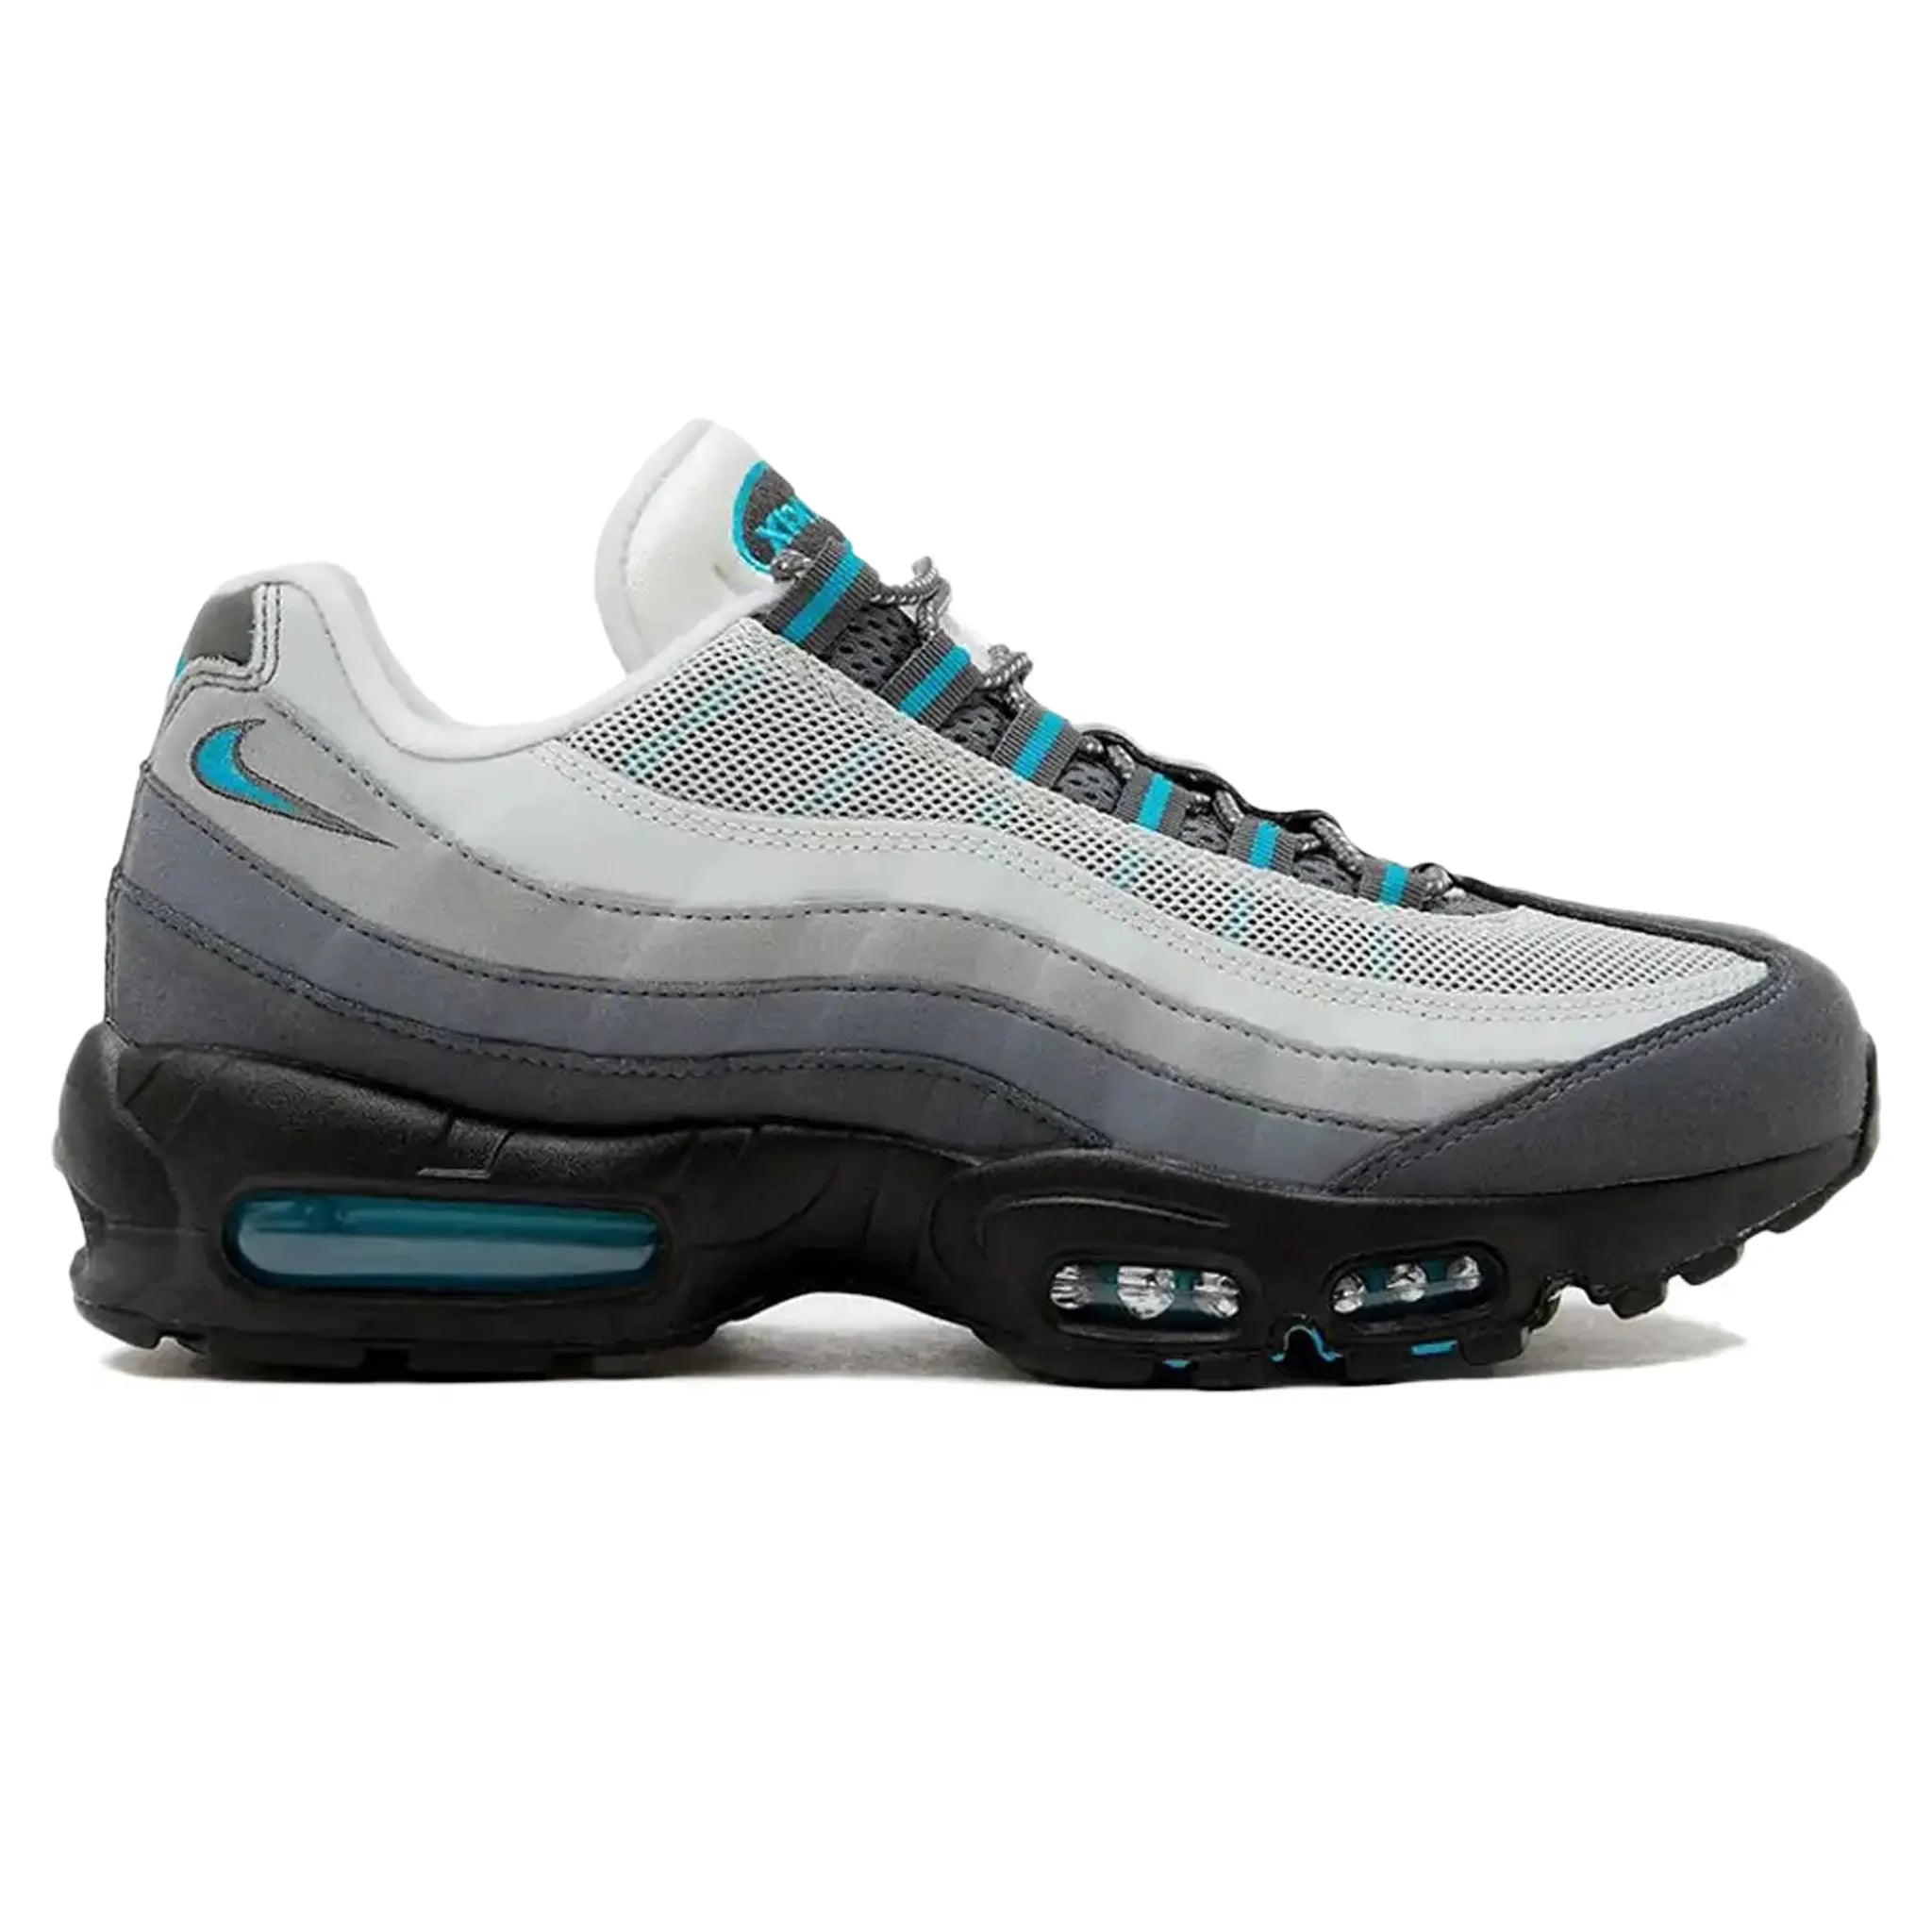 Side view of Nike Air Max 95 Baltic Blue HM0622-003